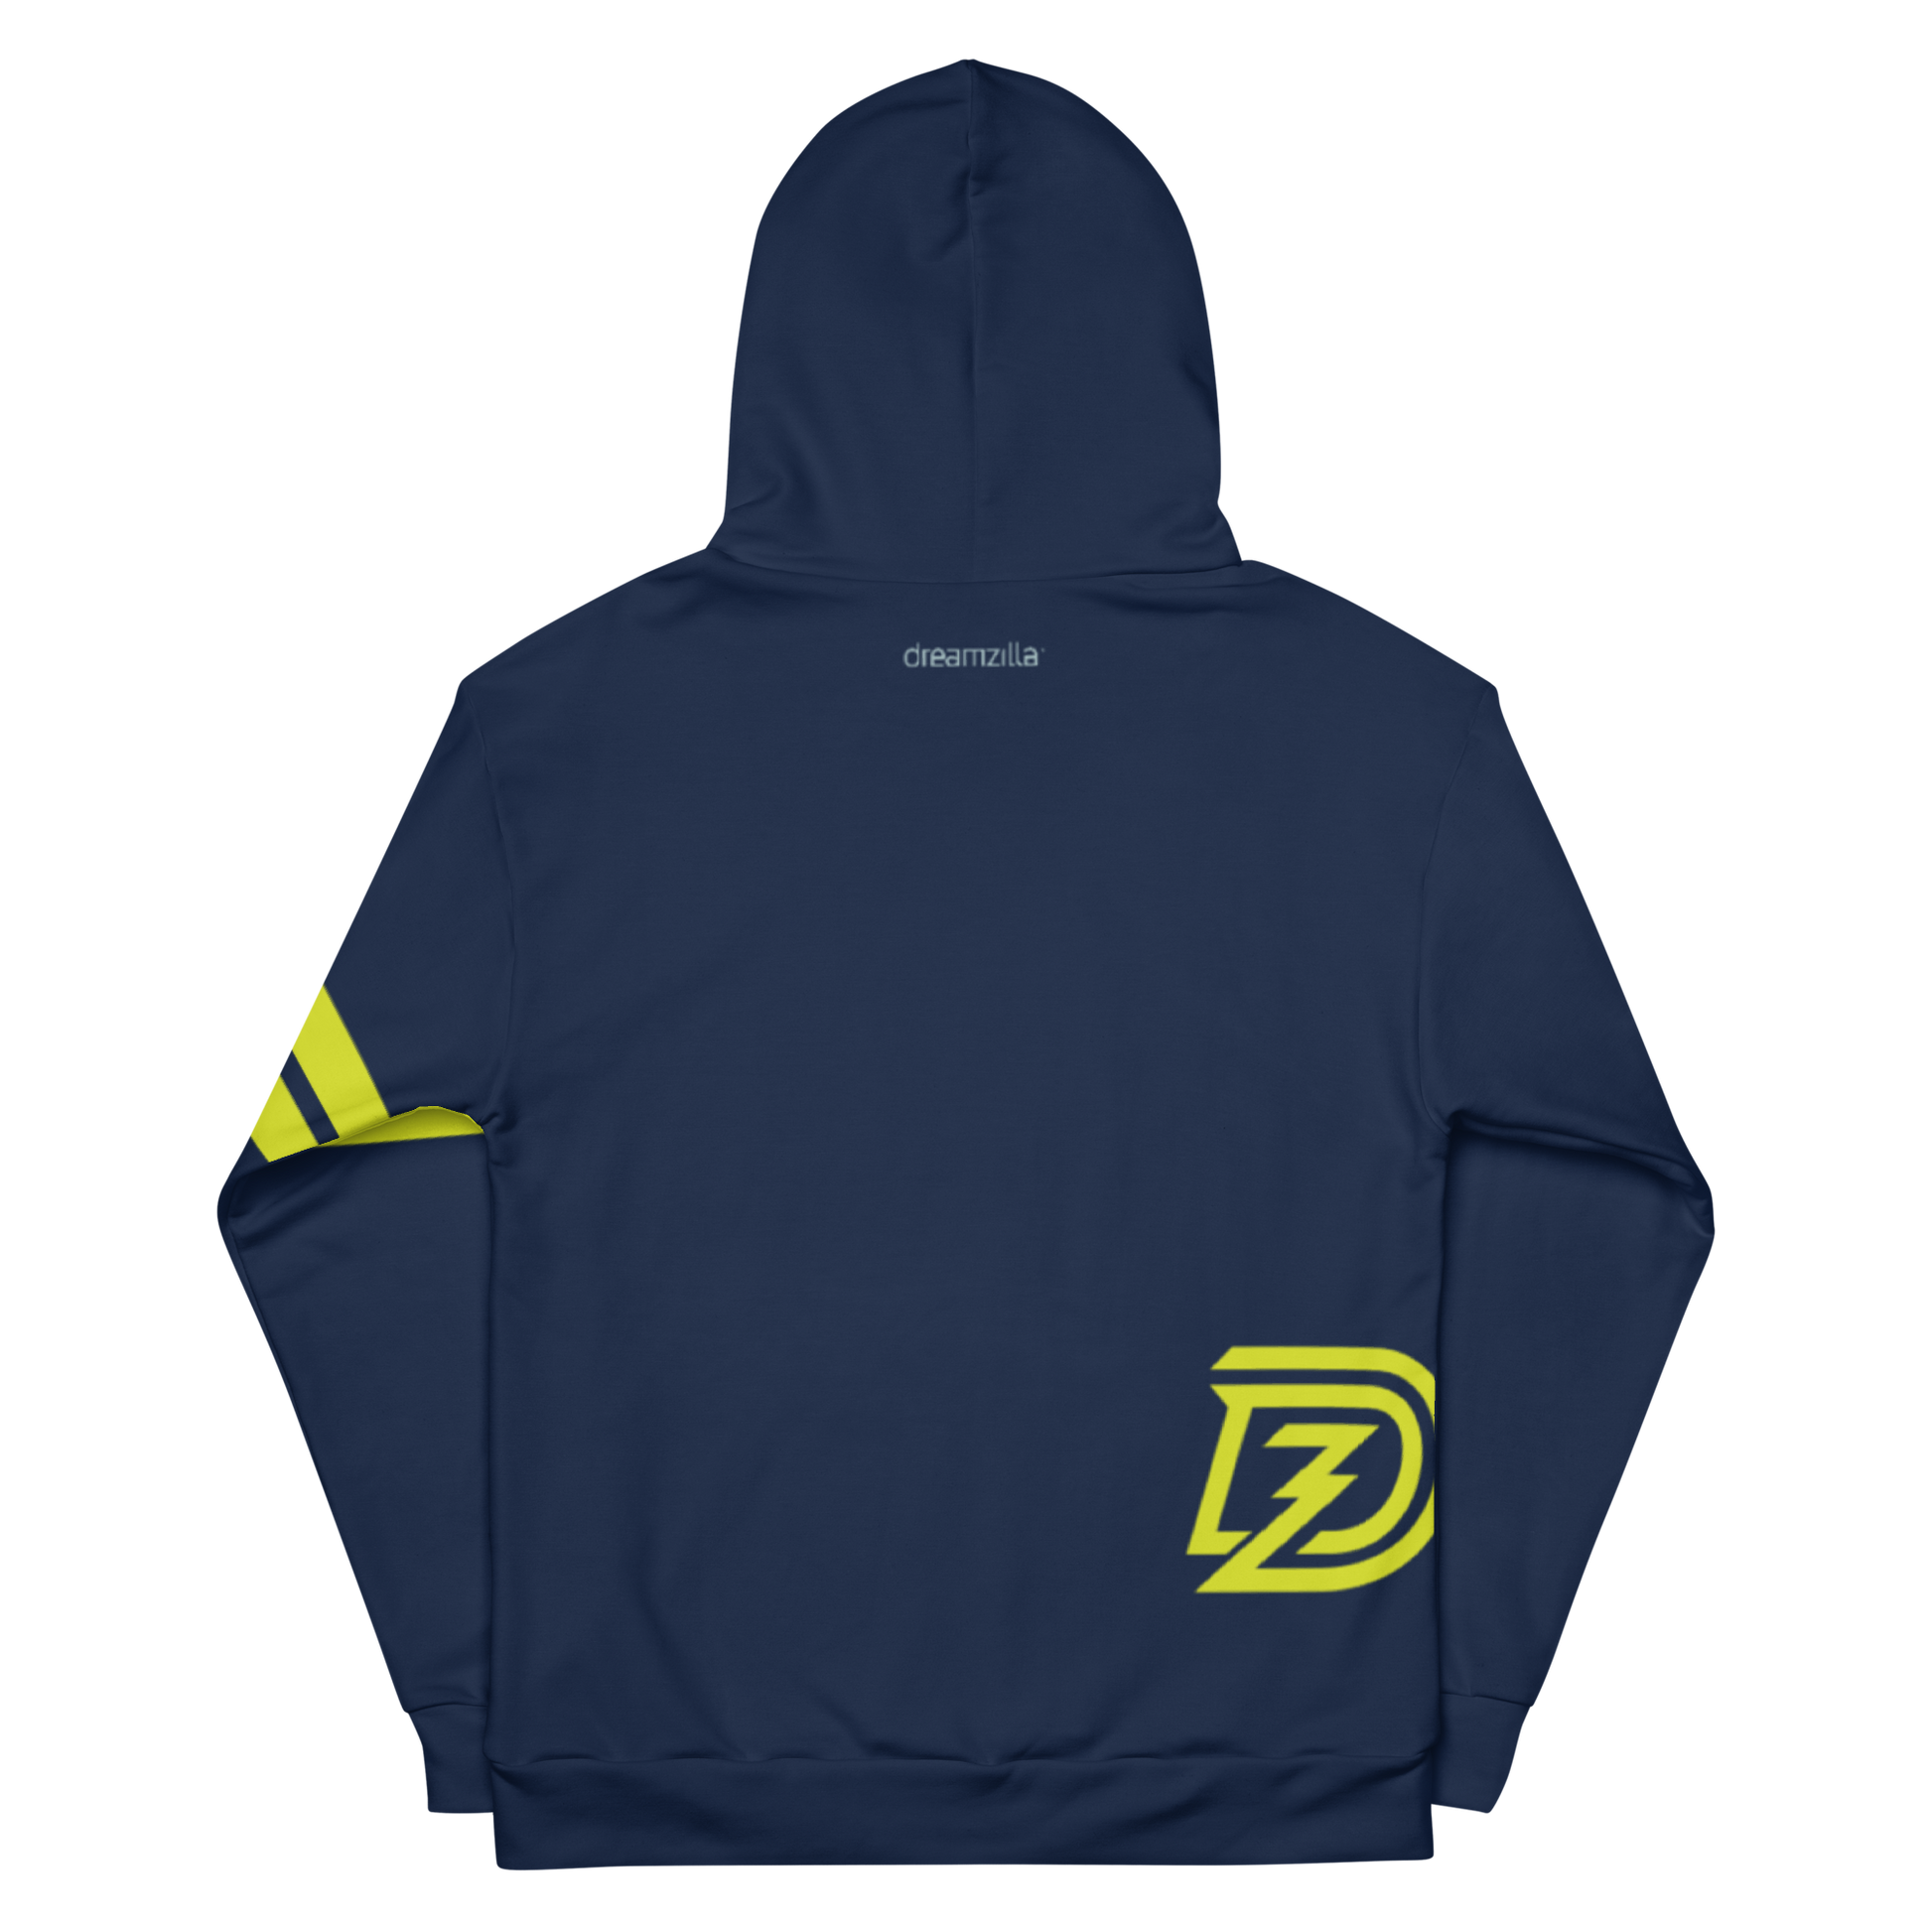 Back of Team Zilla 2022 Unisex Hoodie with Hood Up